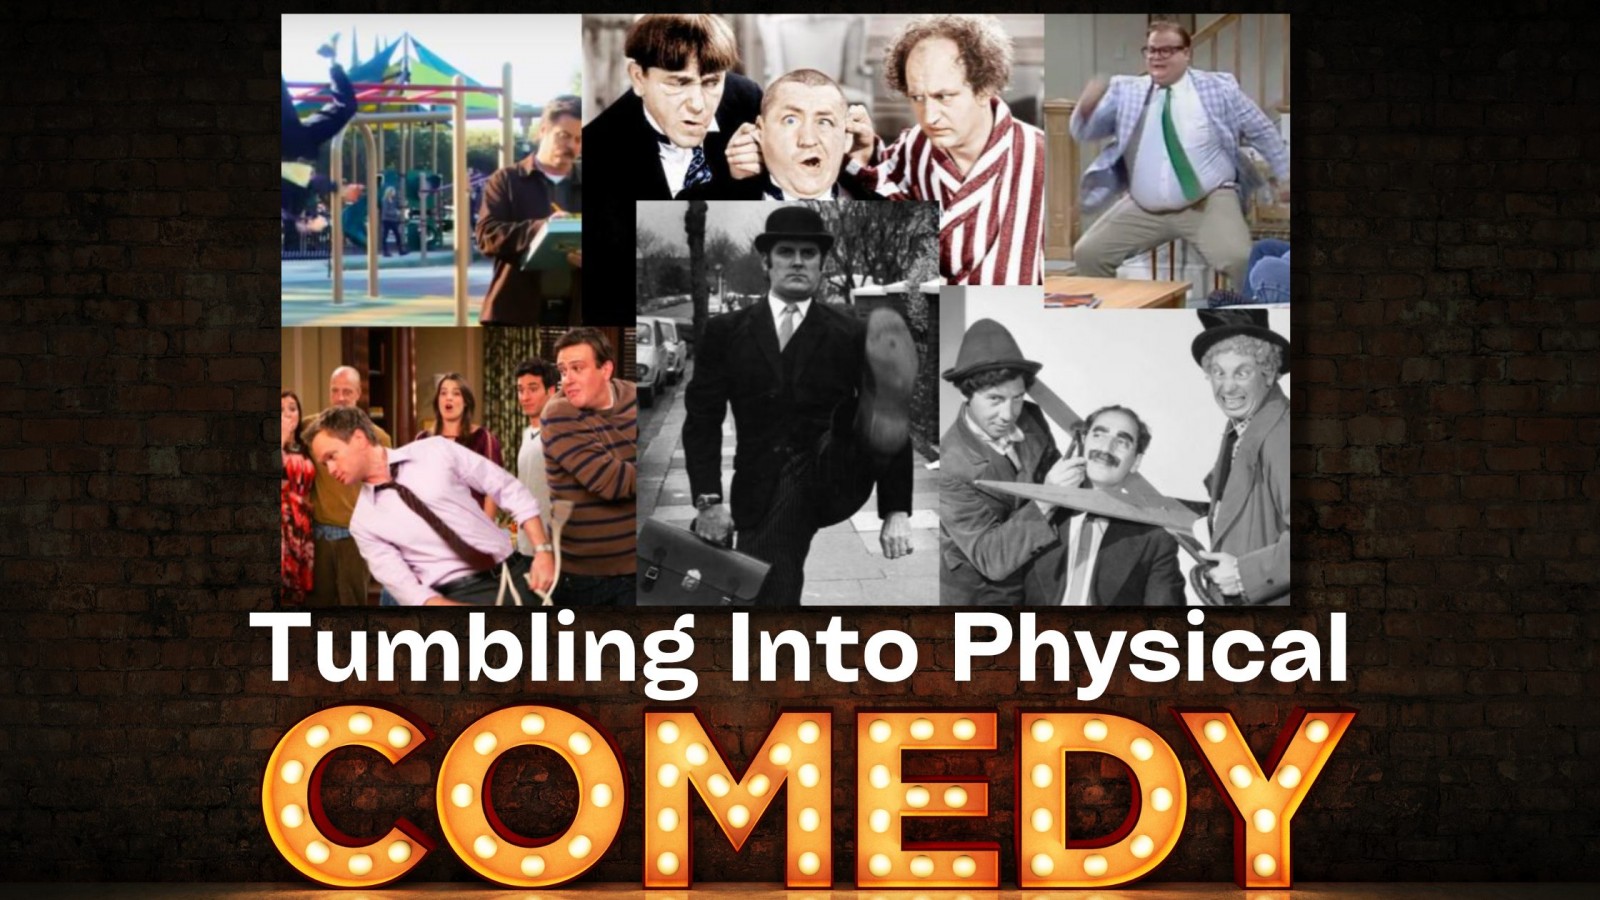 Tumbling Into Physical Comedy!